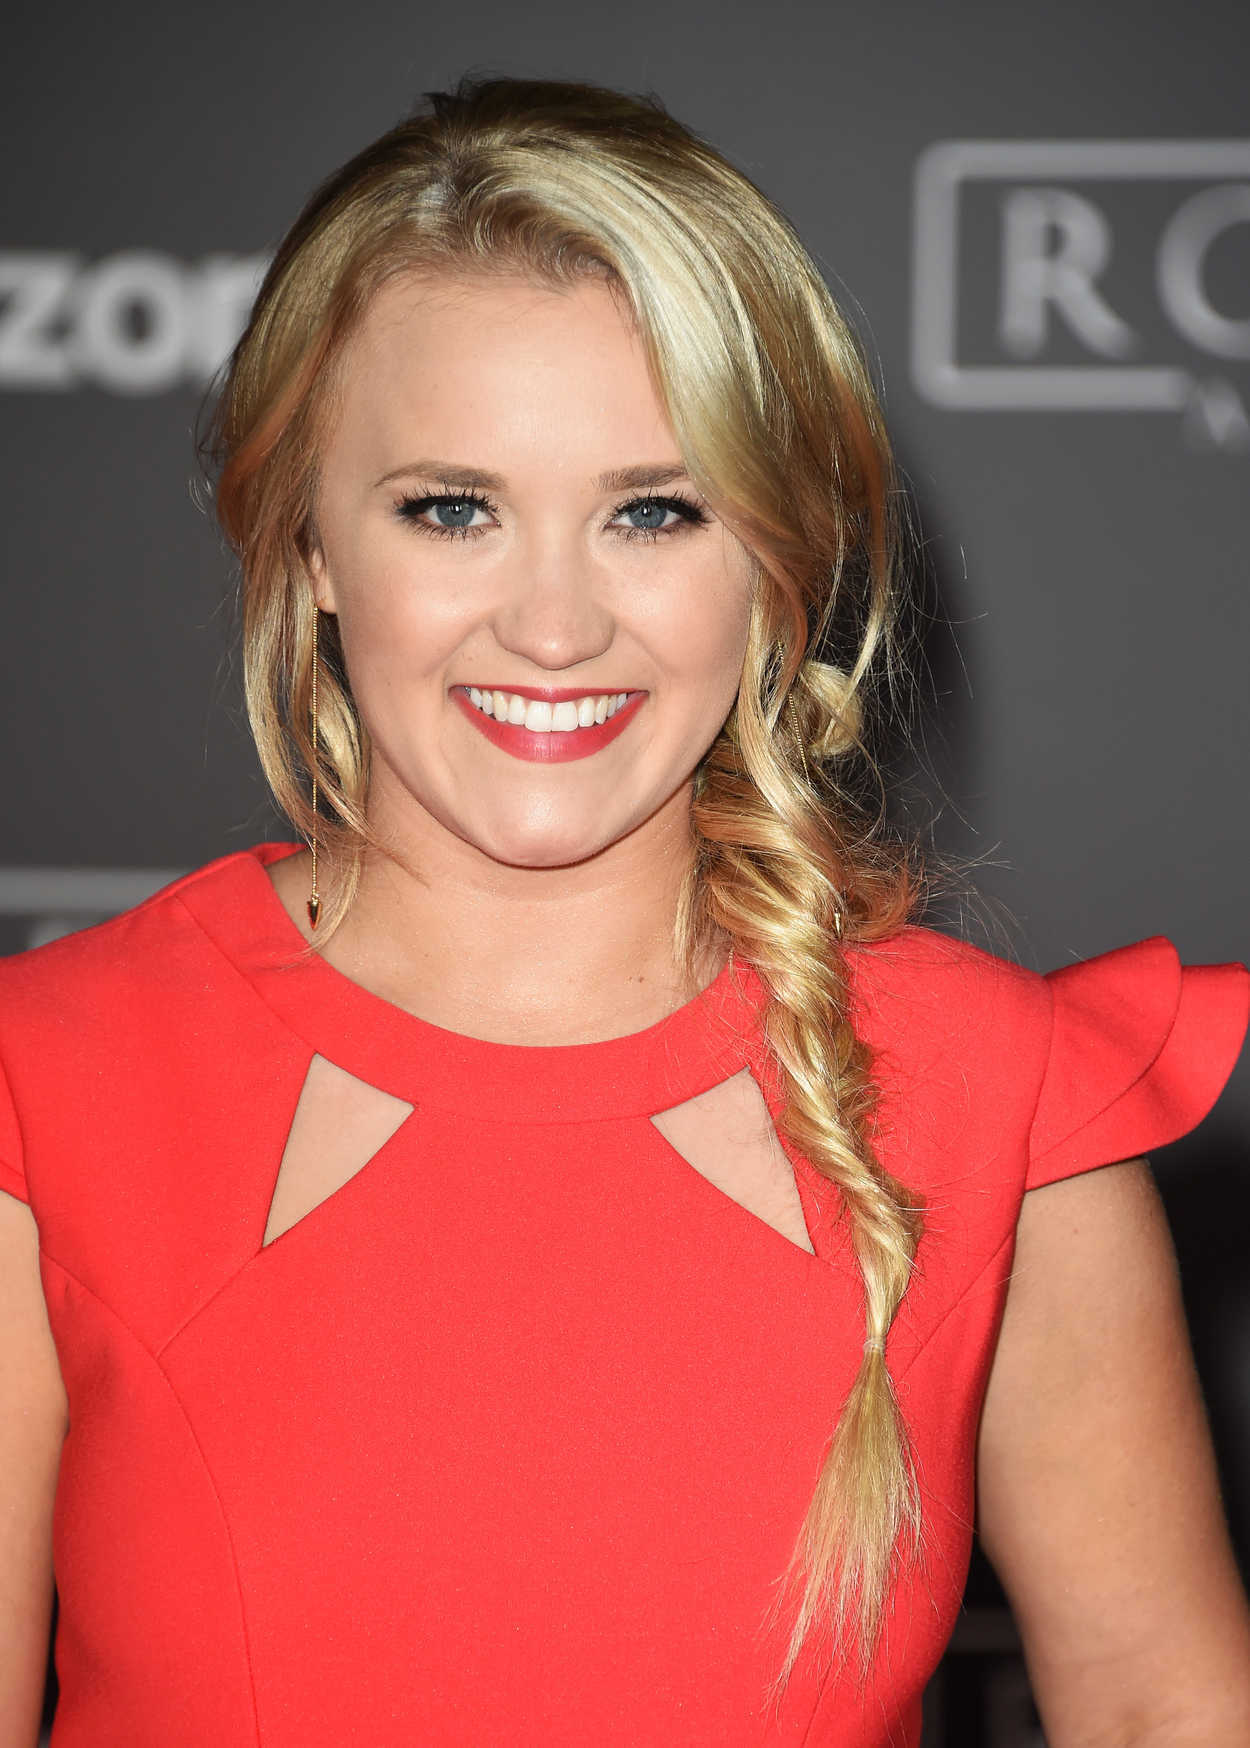 How Old Is Emily Osment